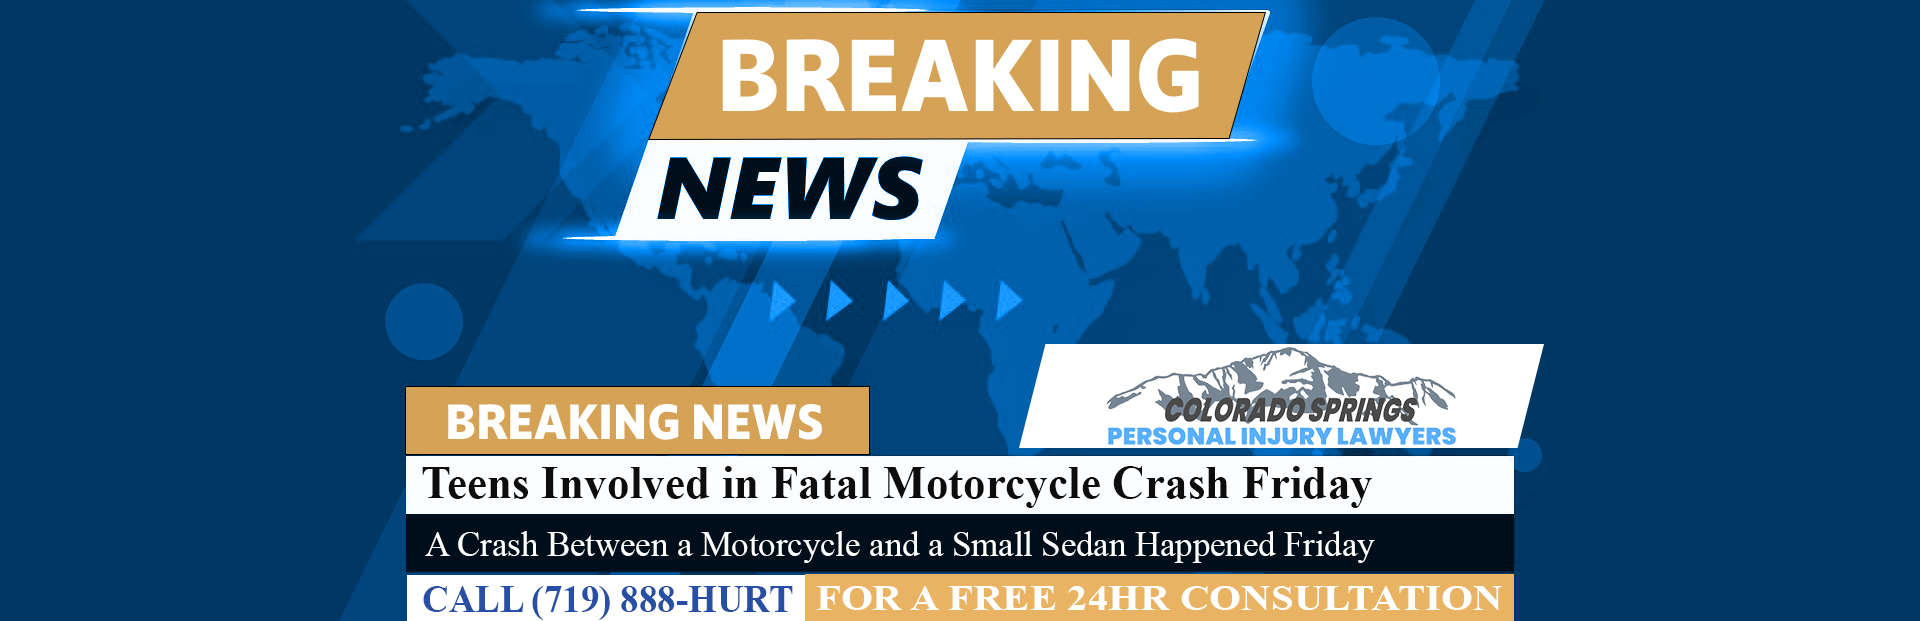 [11-18-23] Teens Involved in Fatal Motorcycle Crash Friday East of Colorado Springs